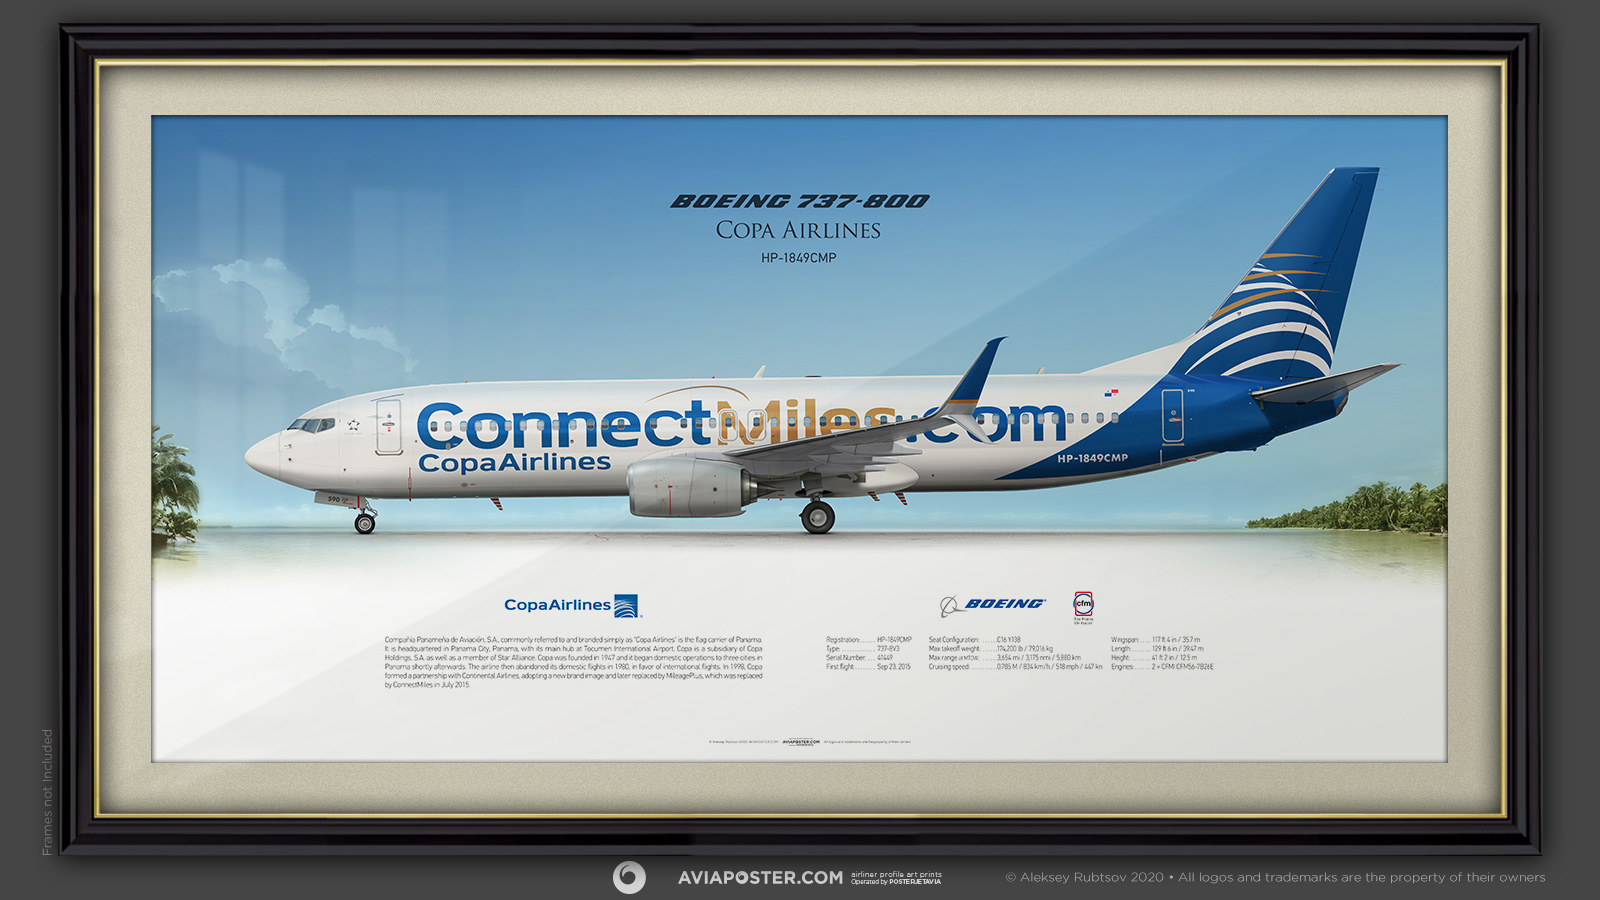 Aviaposter Profile Art Prints Boeing 737 800 Copaairlines Connectmiles Staralliance Airliner Profile Art Prints T Co Kvywgfcx22 Aviation Avgeek Civilaviation Aviationpics Paxex Aircraftgallery Aviator Aviationfans